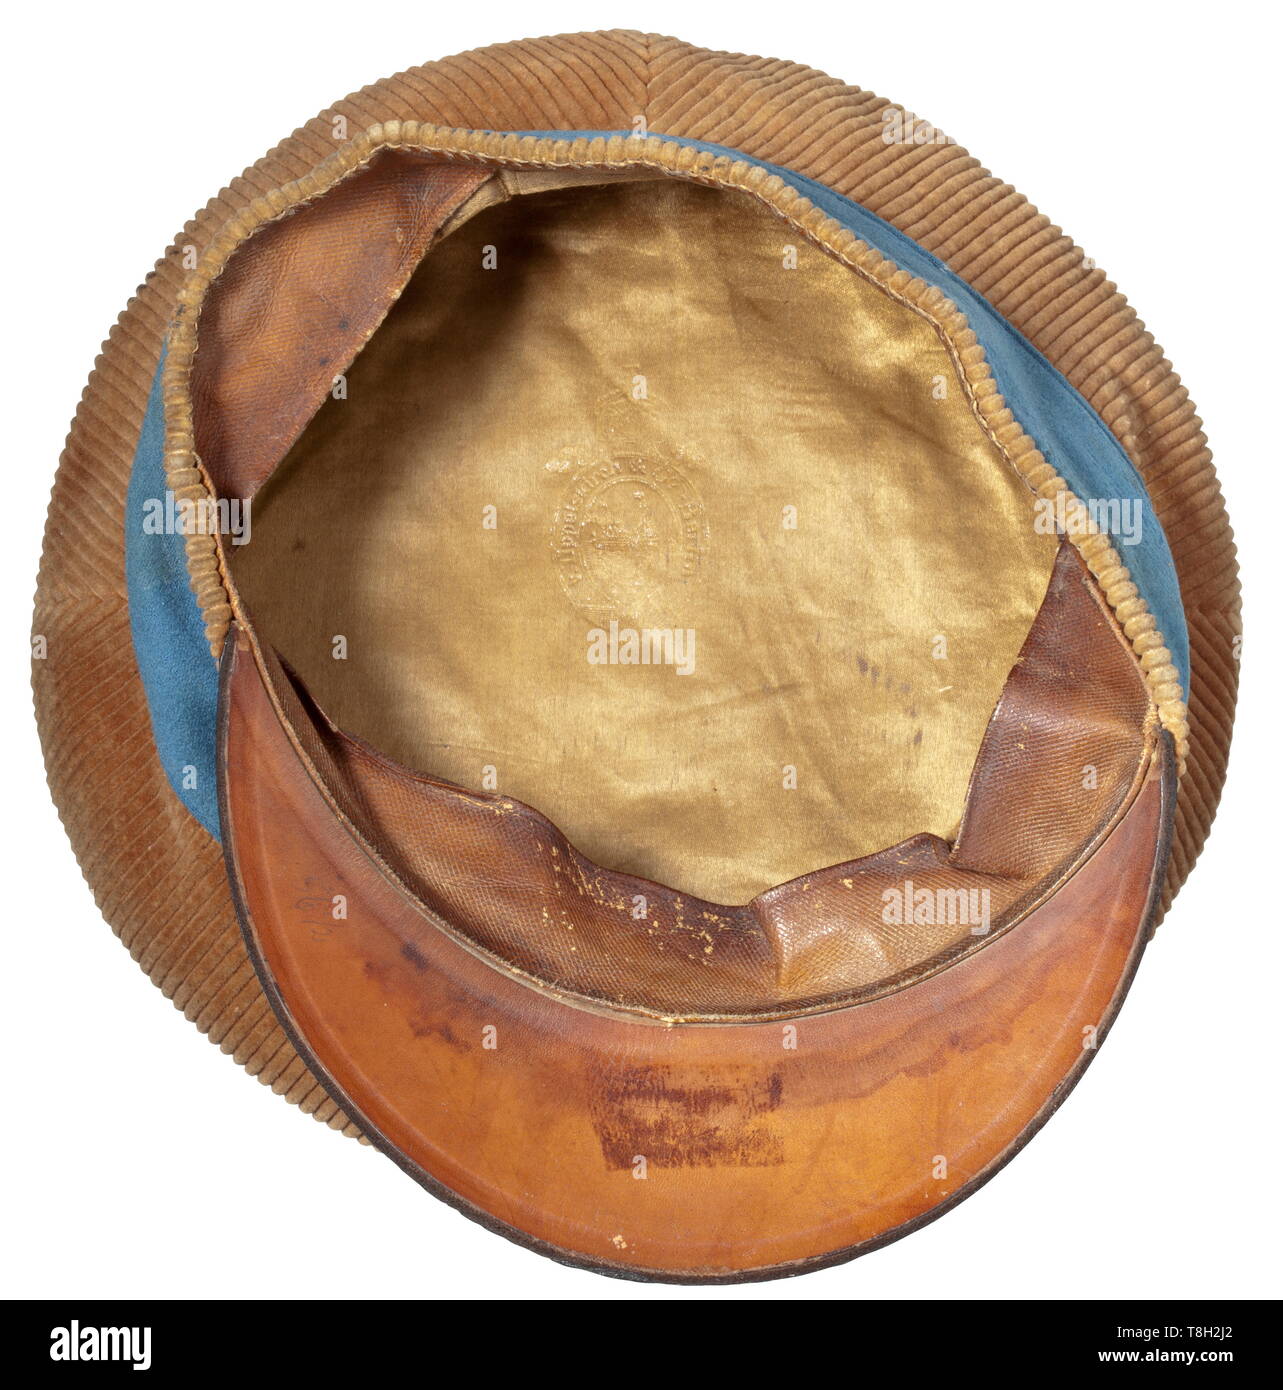 A visor cap for members of the colonial forces in German-South West Africa Brown cord fabric (good condition, slightly darkened), cornflower blue piping and cap band, Reich cockade (topped by a moth hole), black leather visor with slight indentations. In the lid golden inscription of the hat maker's name (v. Tippelskirch & Co. Berlin). Brown leather sweatband, light brown silk lining. Cf. lot 3997 from our 65th auction. With large-size (13 x 18 cm) carte de visite photo with the portrait of the soldier. Extremely rare piece of garment of the colo, Additional-Rights-Clearance-Info-Not-Available Stock Photo